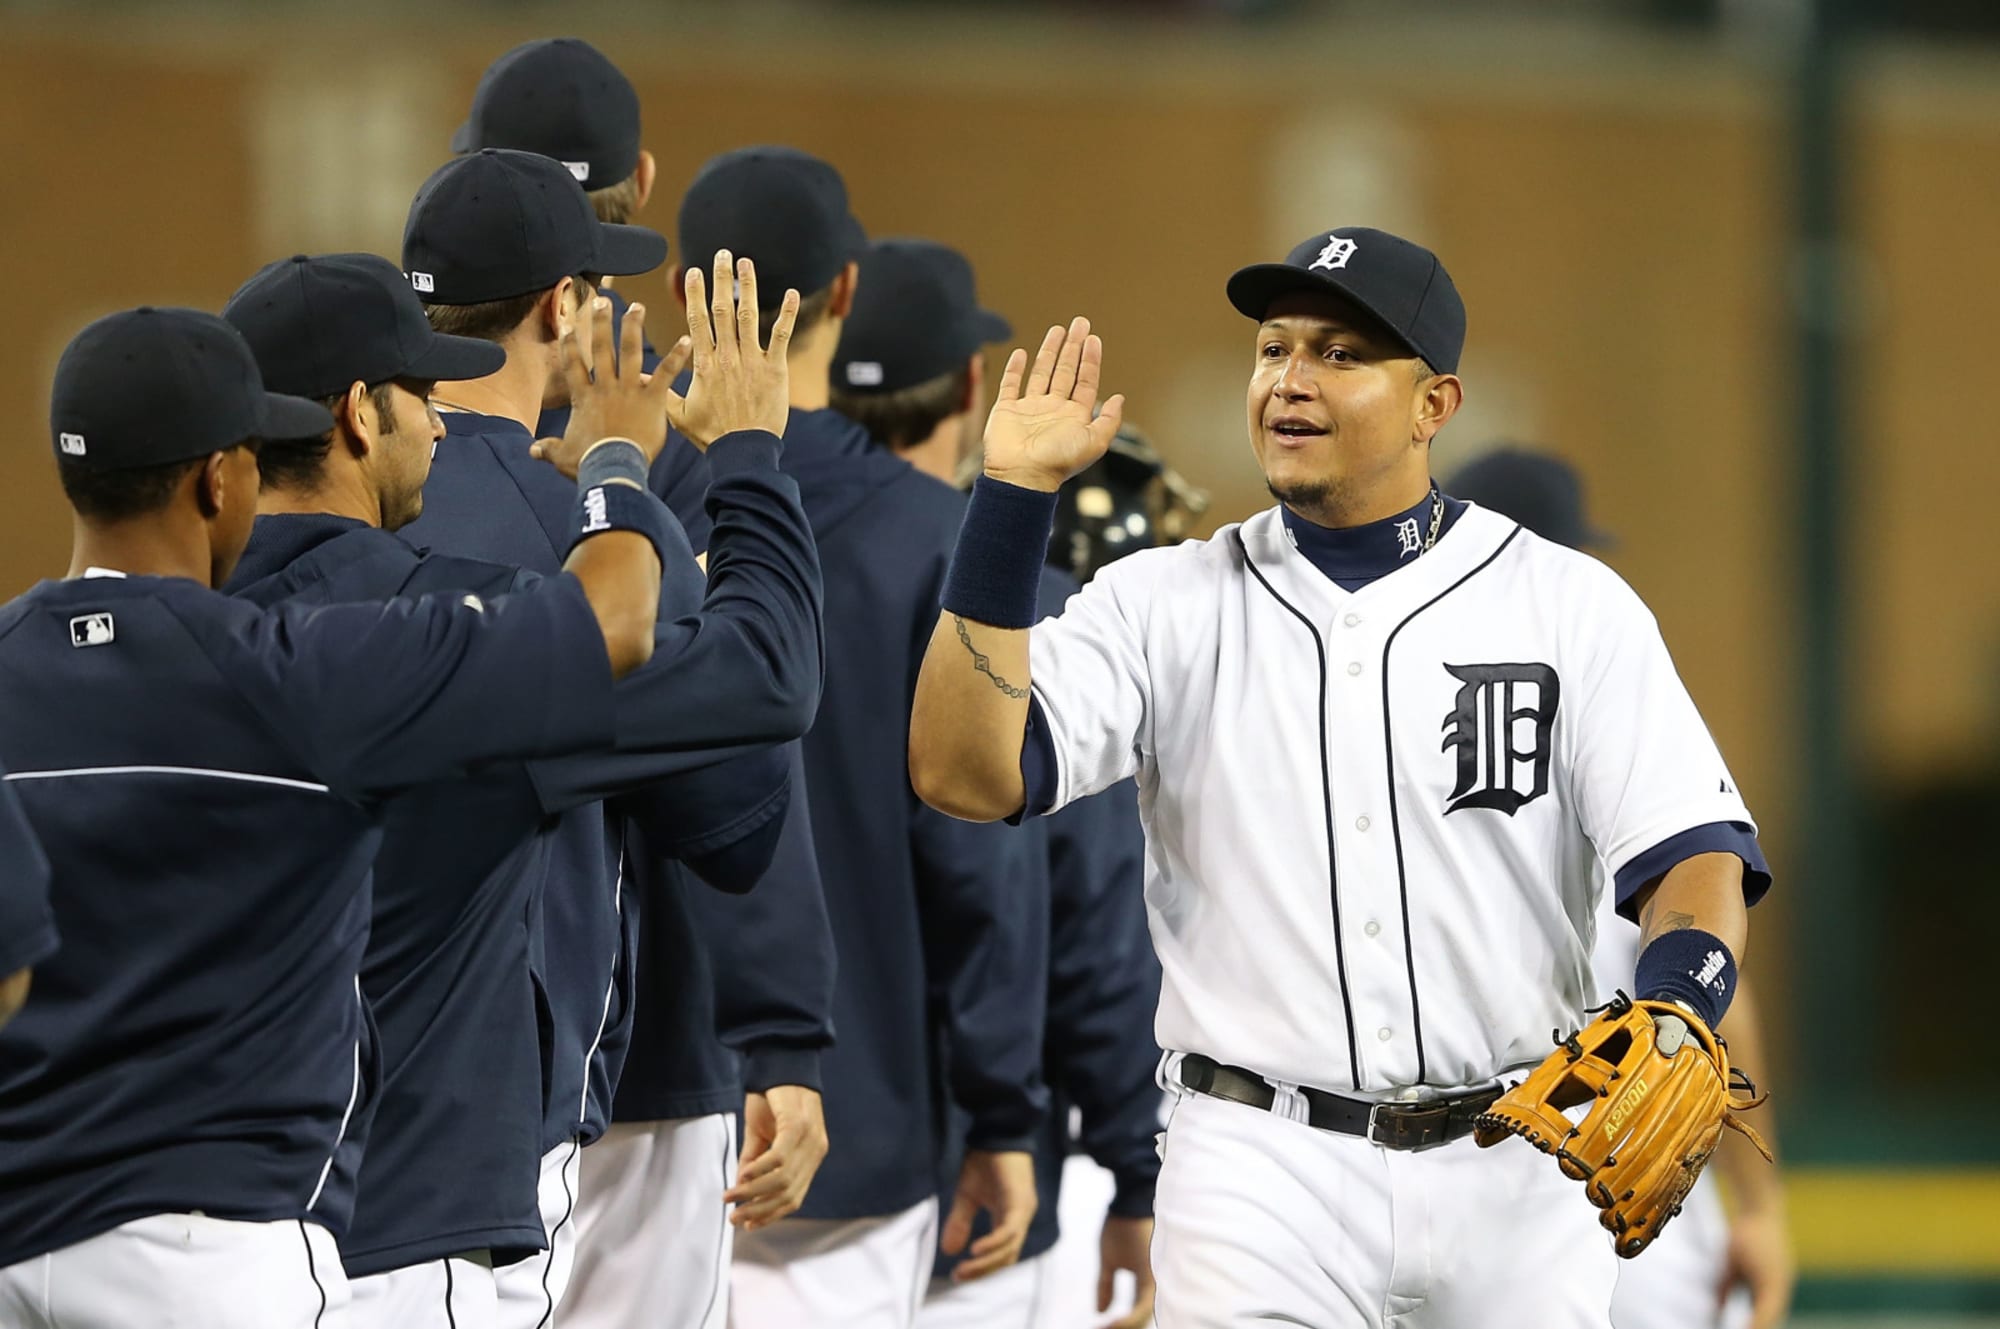 Detroit Tigers The 25man roster challenge